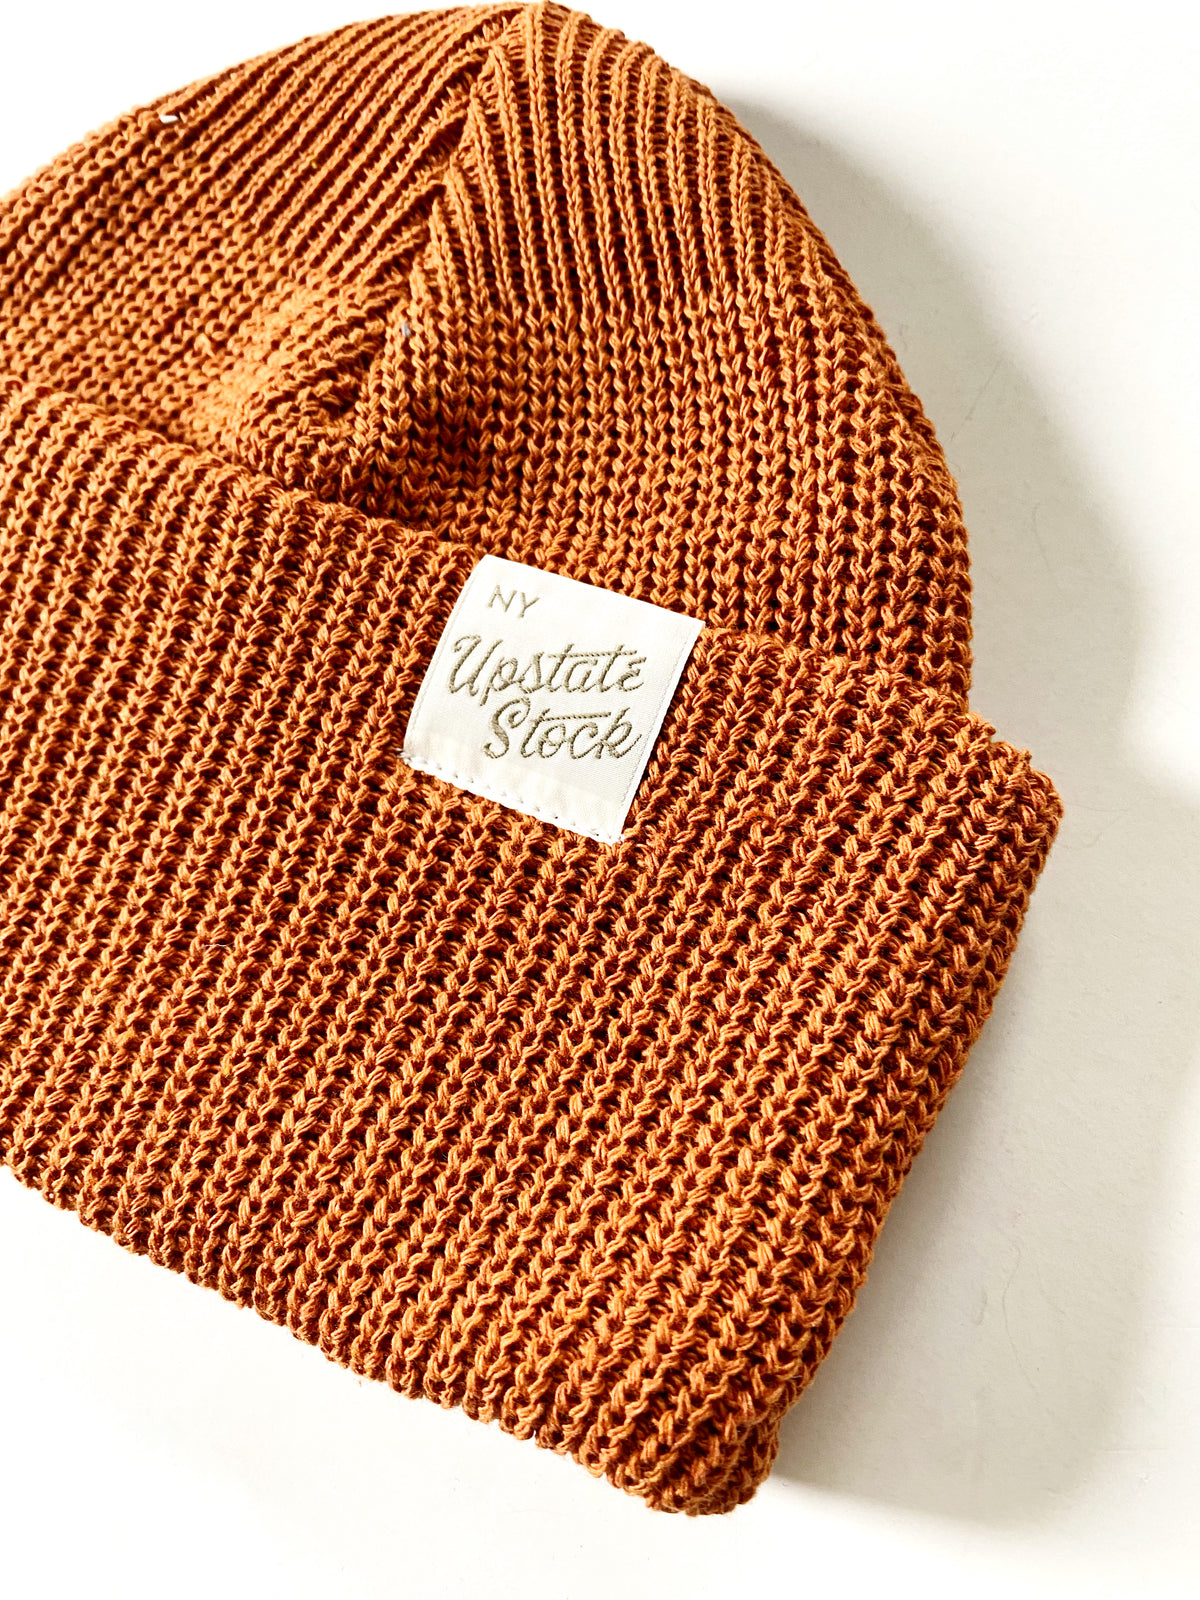 Upstate Stock: Upcycled Cotton Beanie Multiple Colors